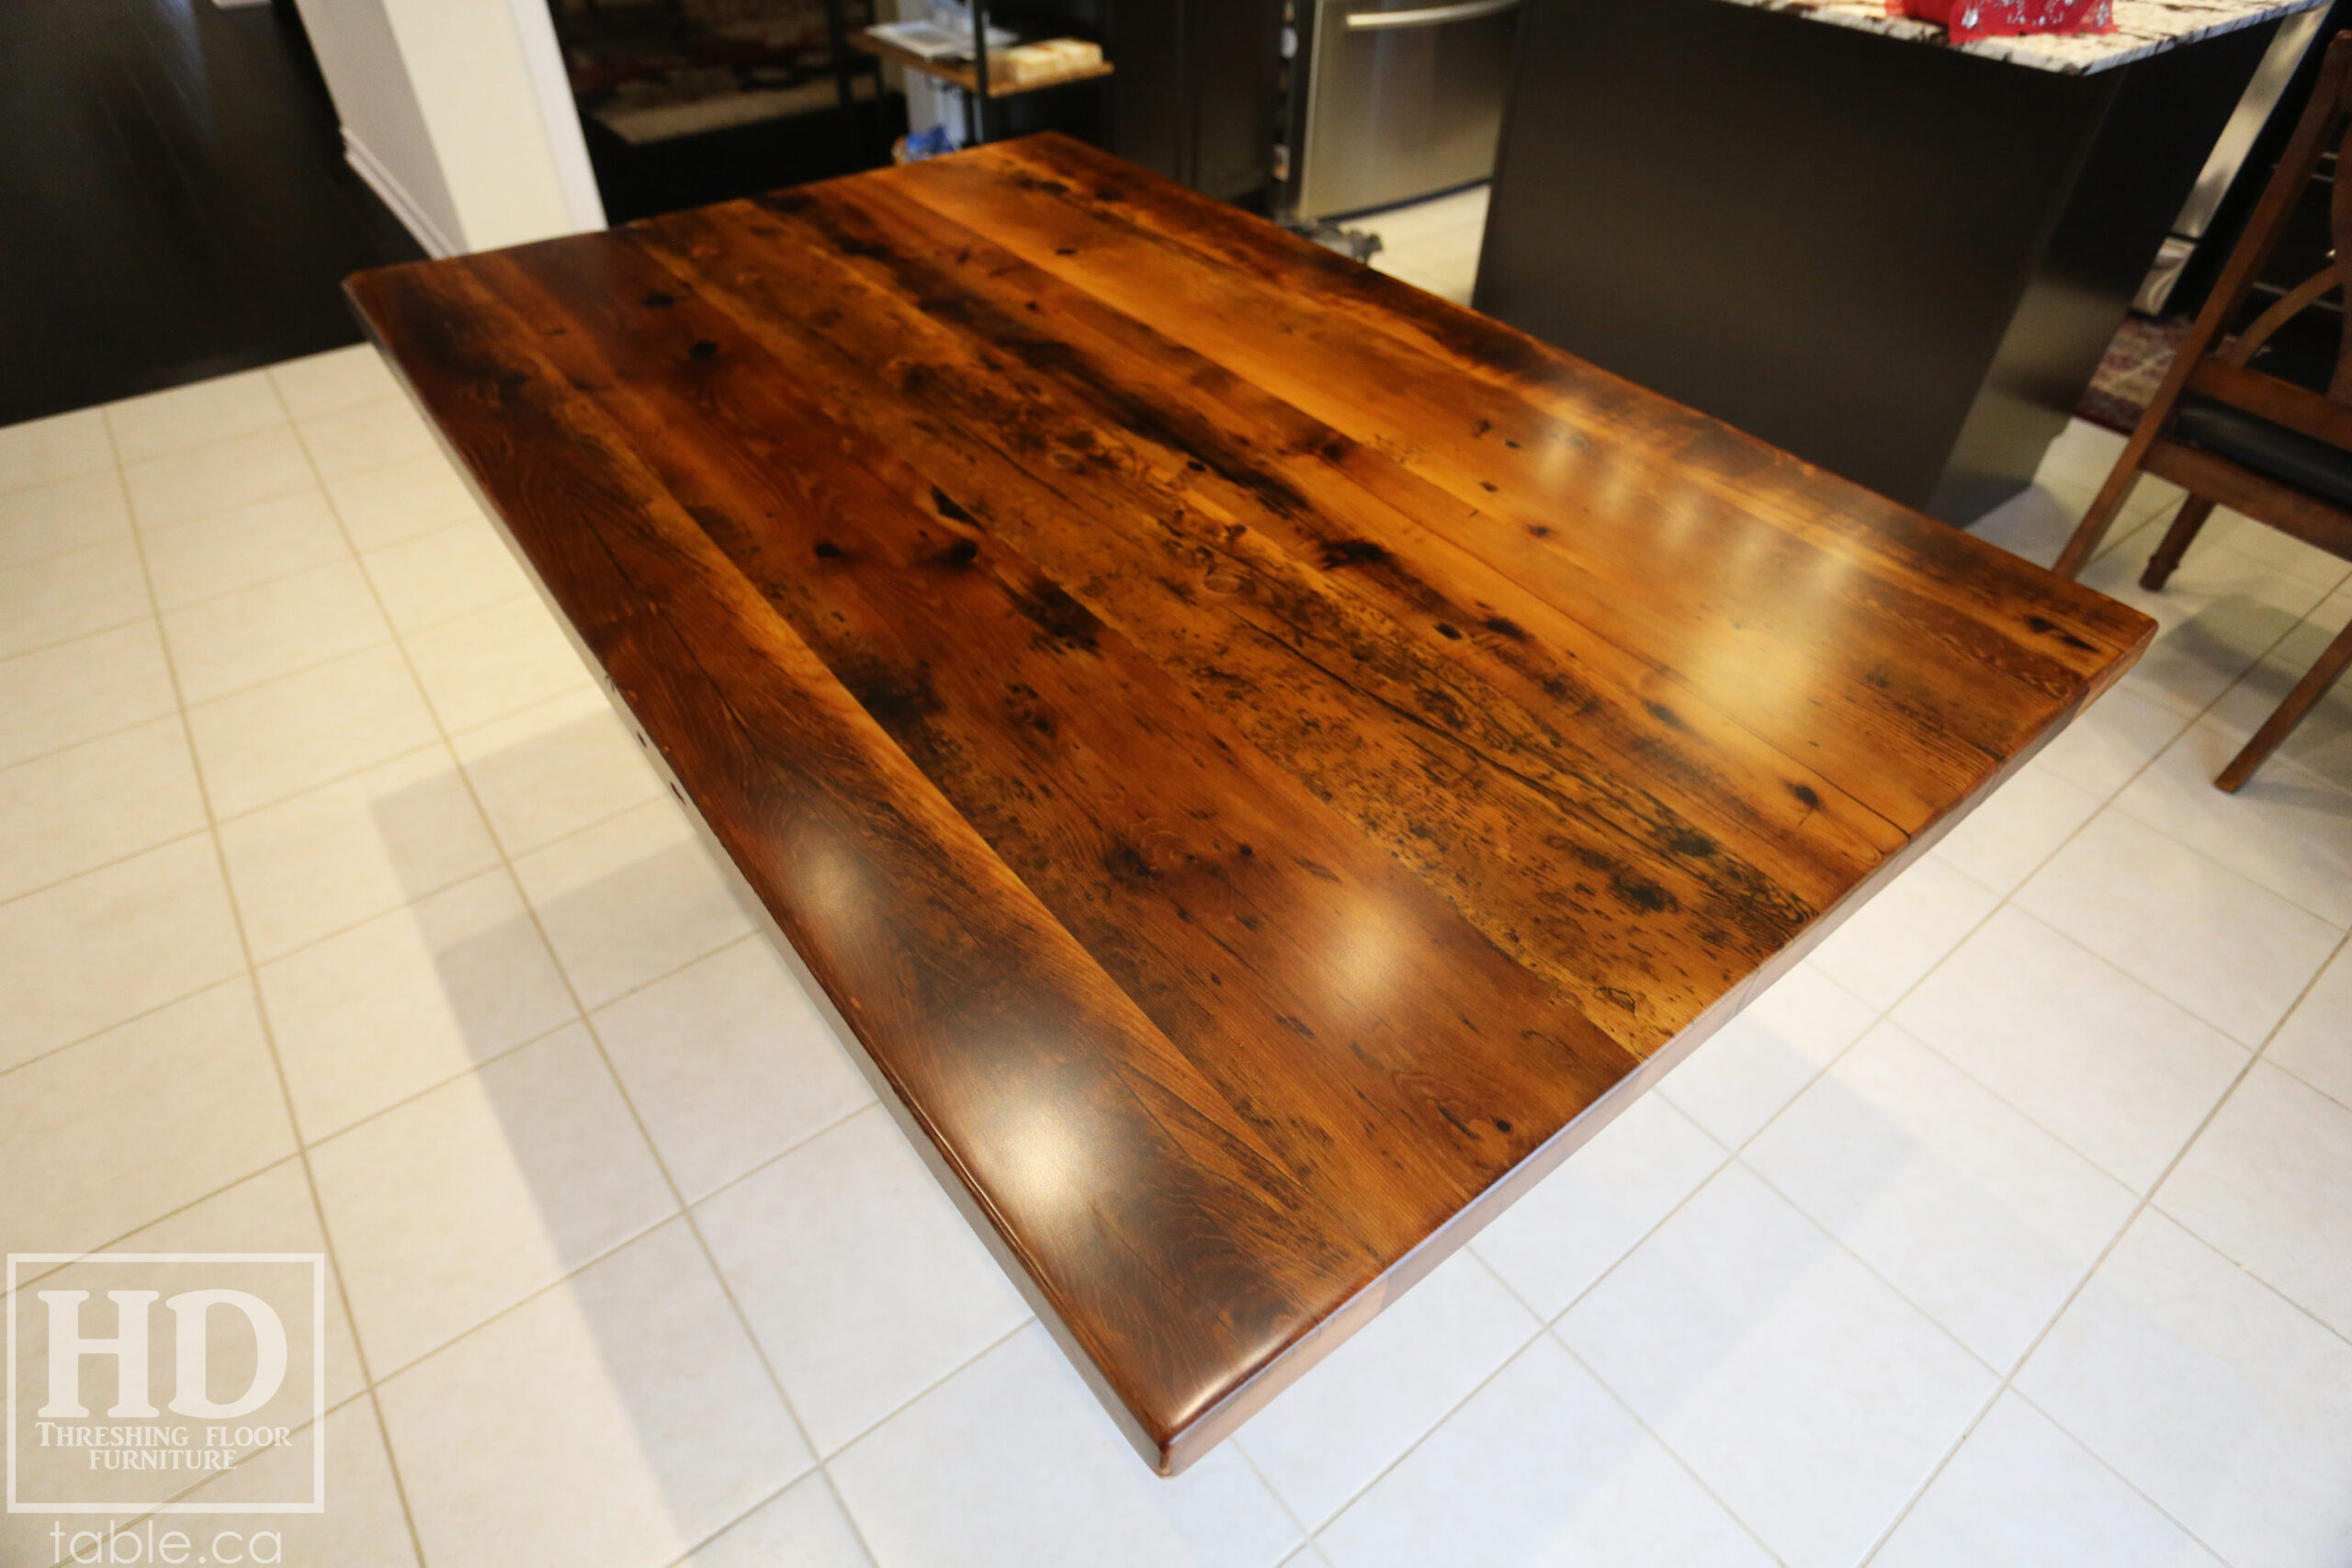 5' Reclaimed Ontario Barnwood Table we made for a Brampton Home - 38" wide - Plank Base Option - Old Growth Hemlock Threshing Floor Construction - Original edges & distressing maintained - Premium epoxy + satin polyurethane finish - No breadboard ends option - One 18" Leaf - www.table.ca

